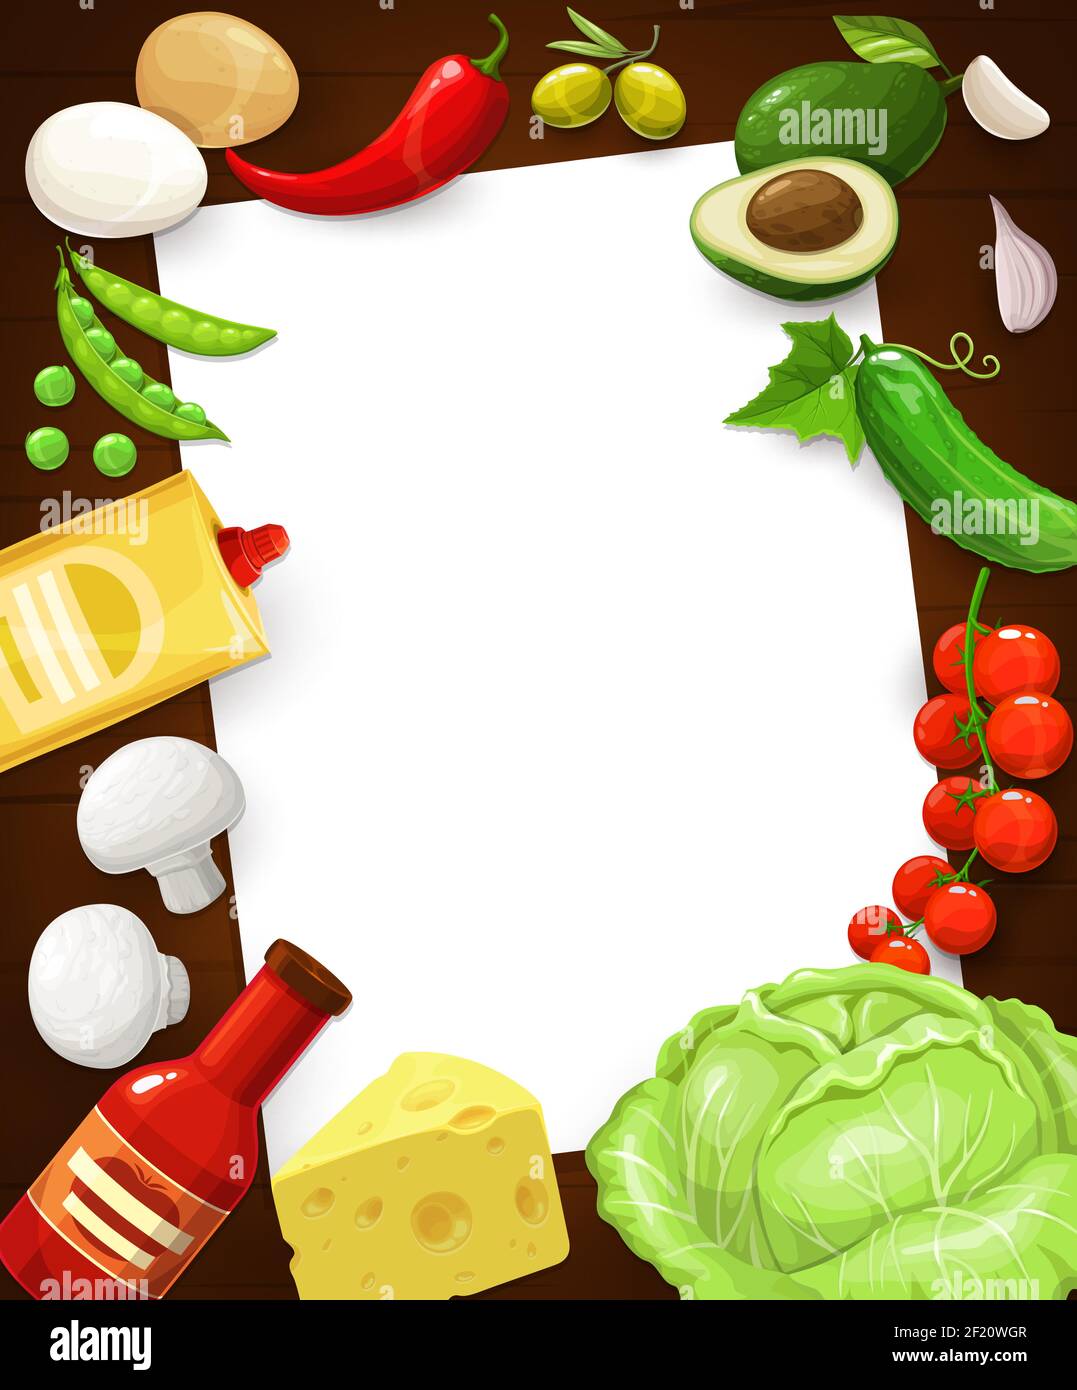 Cute Colorful Template Frame for a Recipe Book or Card Illustration with  Vegetables Stock Vector - Illustration of food, paper: 67845569